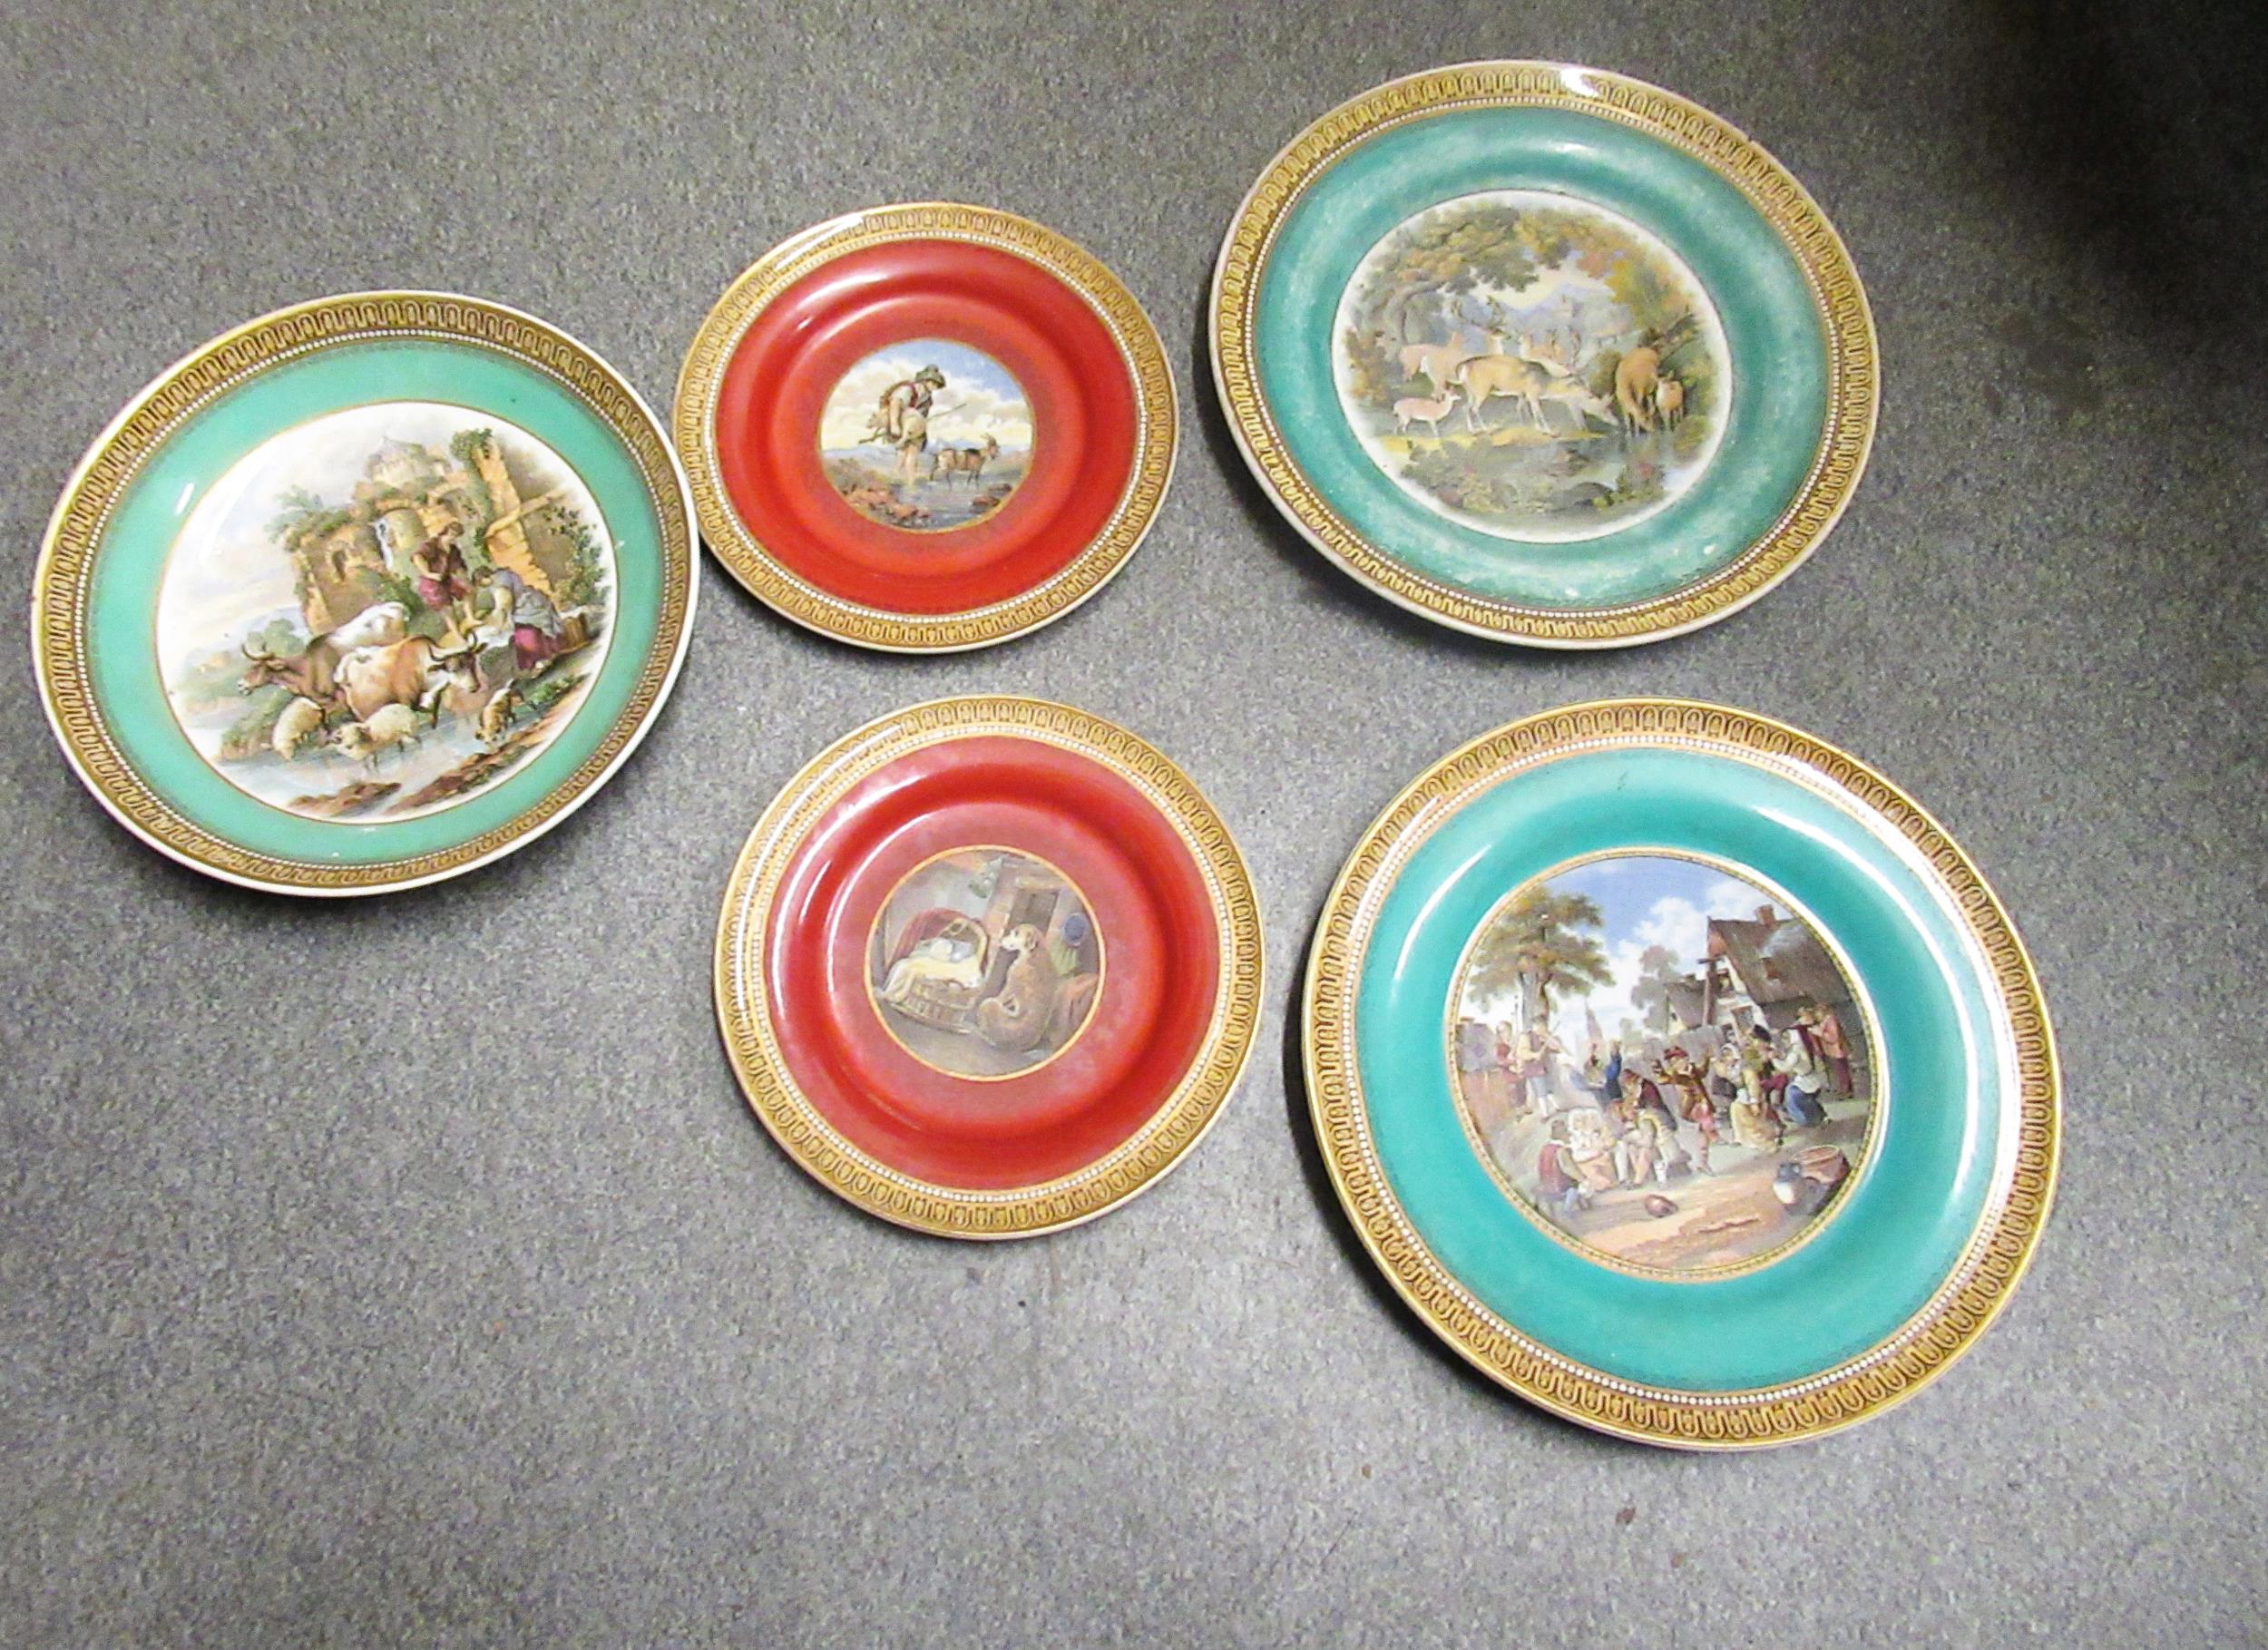 Collection of various 19th and early 20th Century Prattware plates, a mug and other ceramics - Image 2 of 5